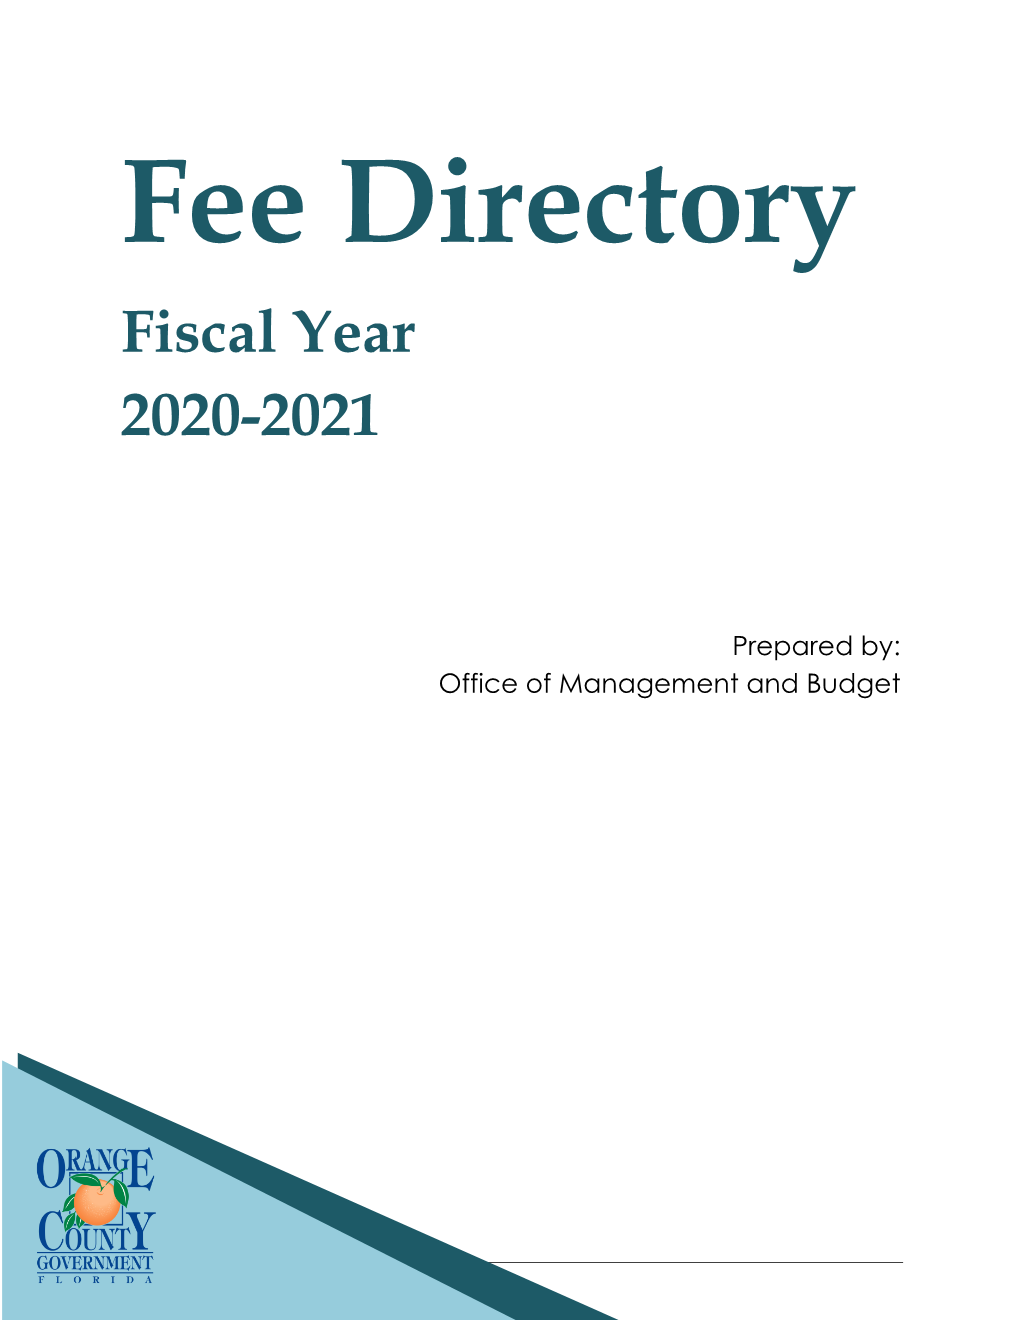 Fee Directory Fiscal Year 2020-2021